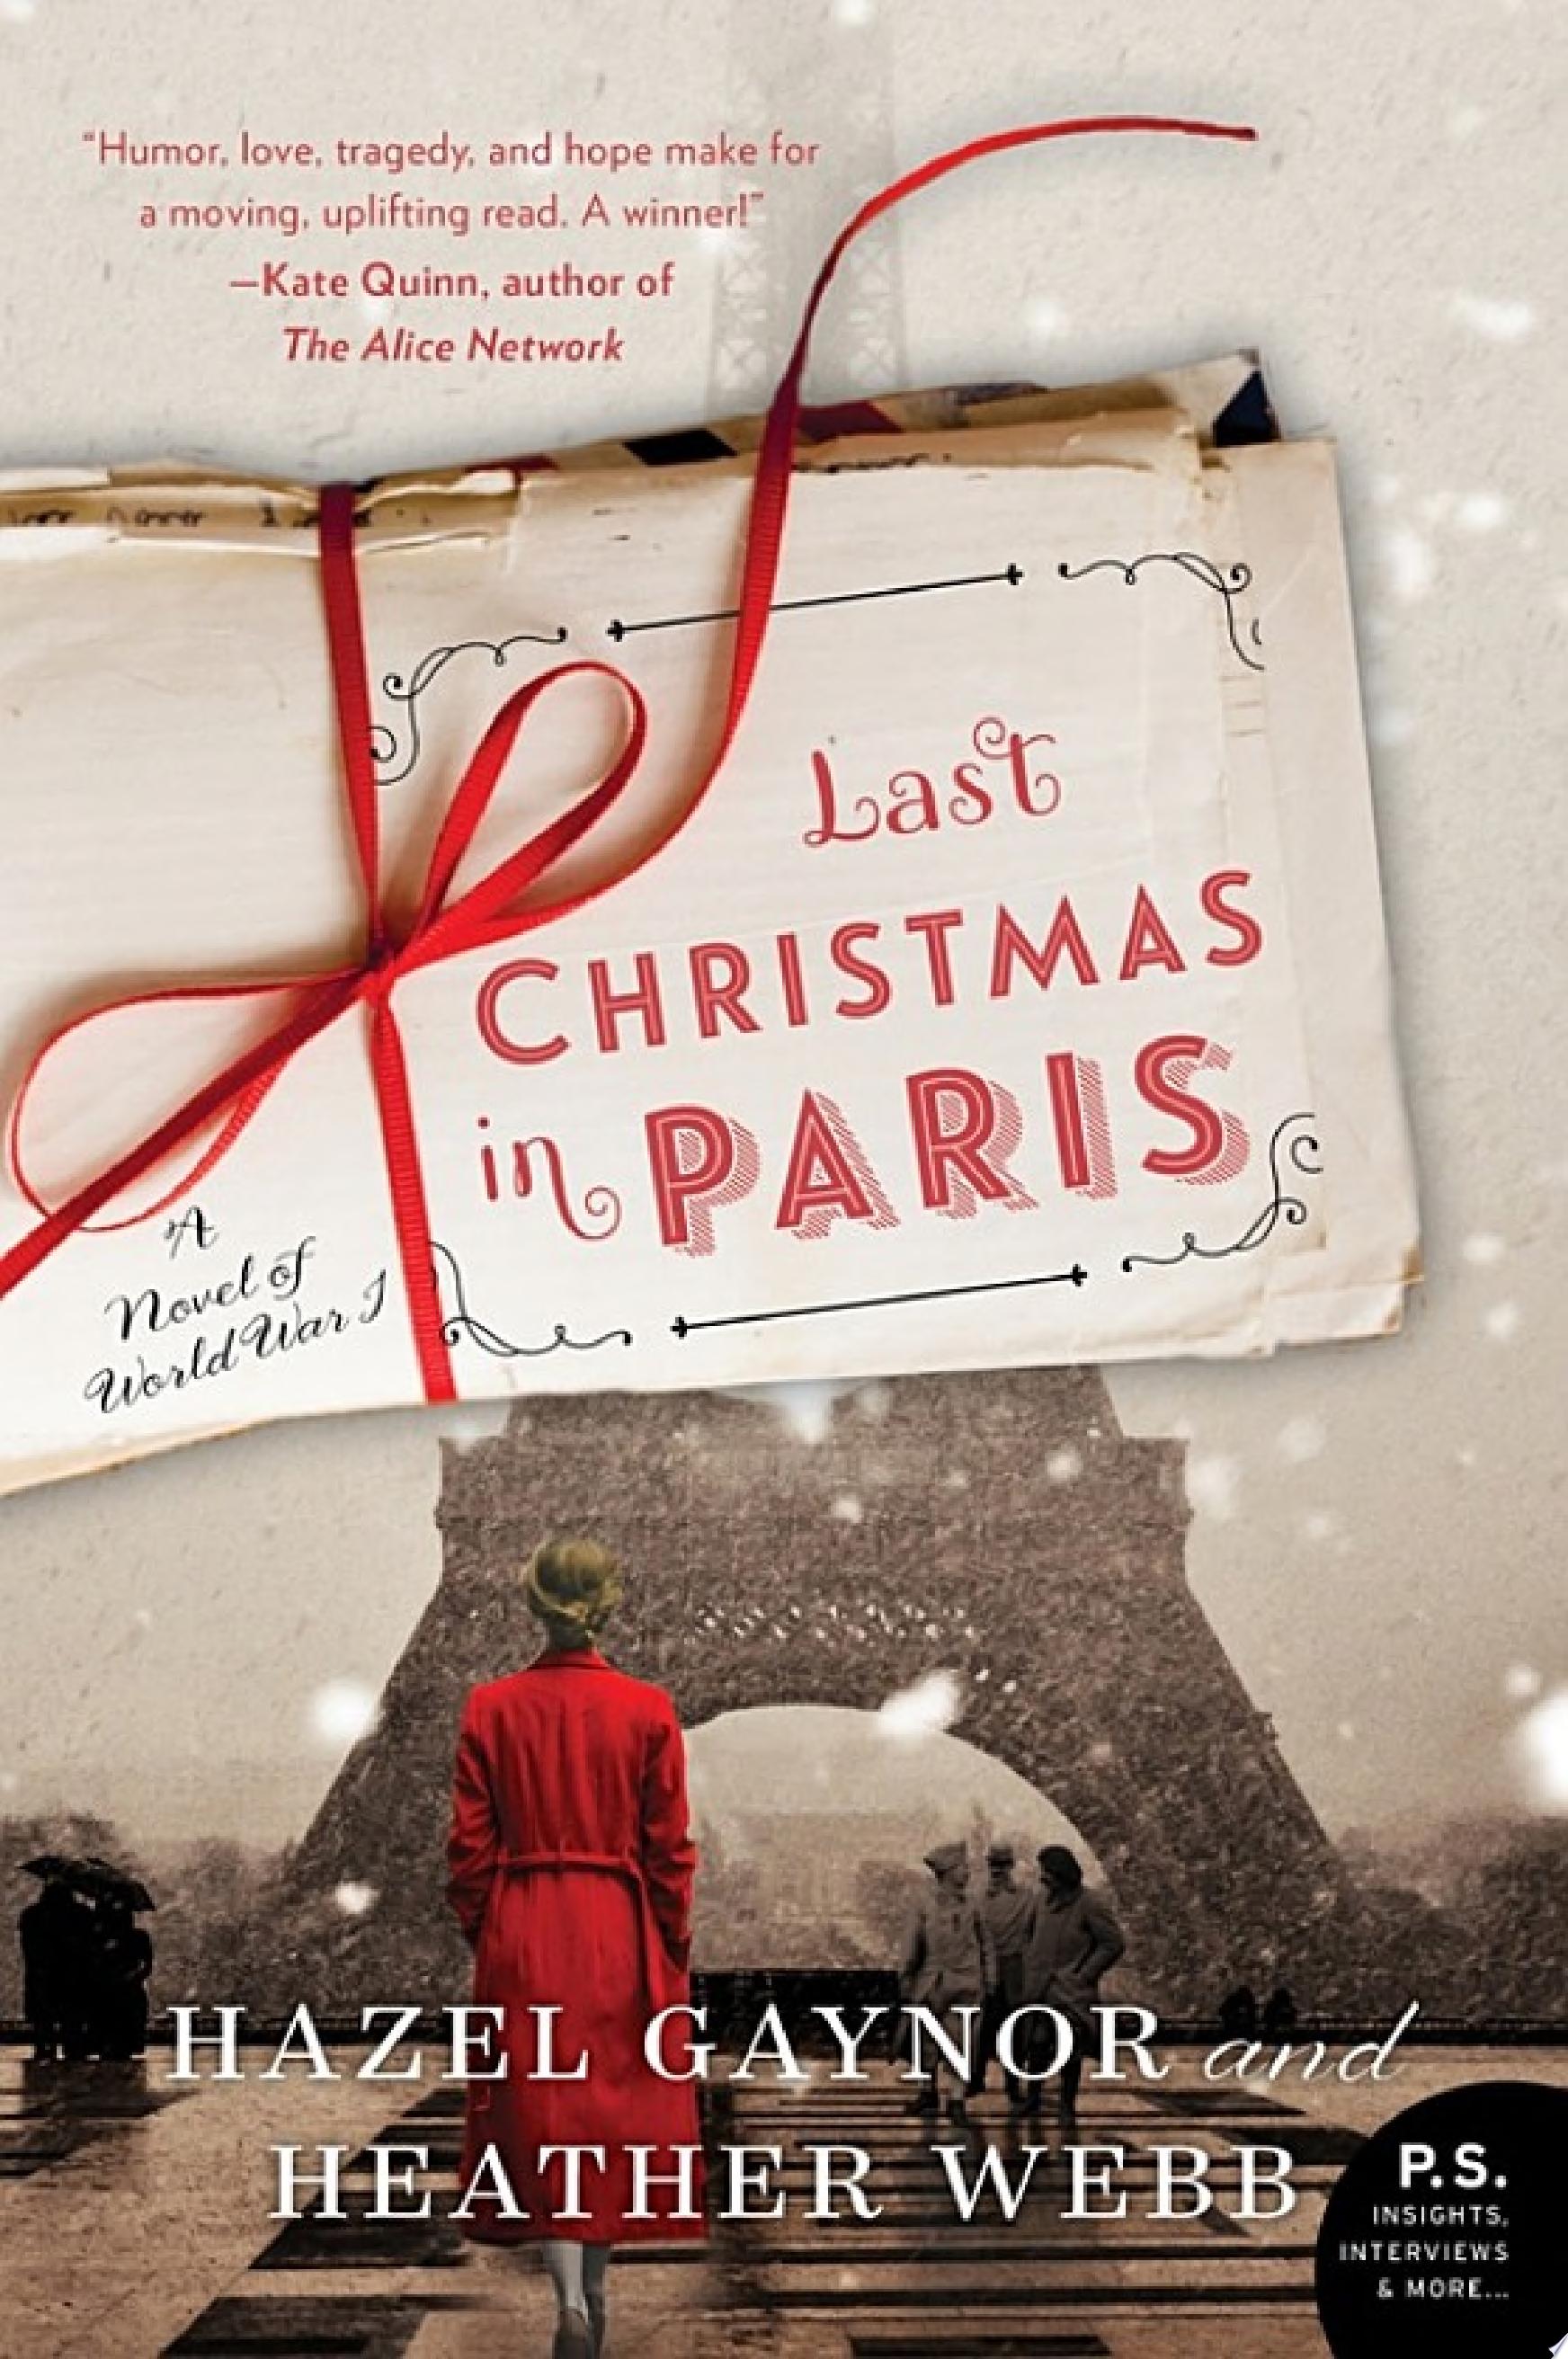 Image for "Last Christmas in Paris"